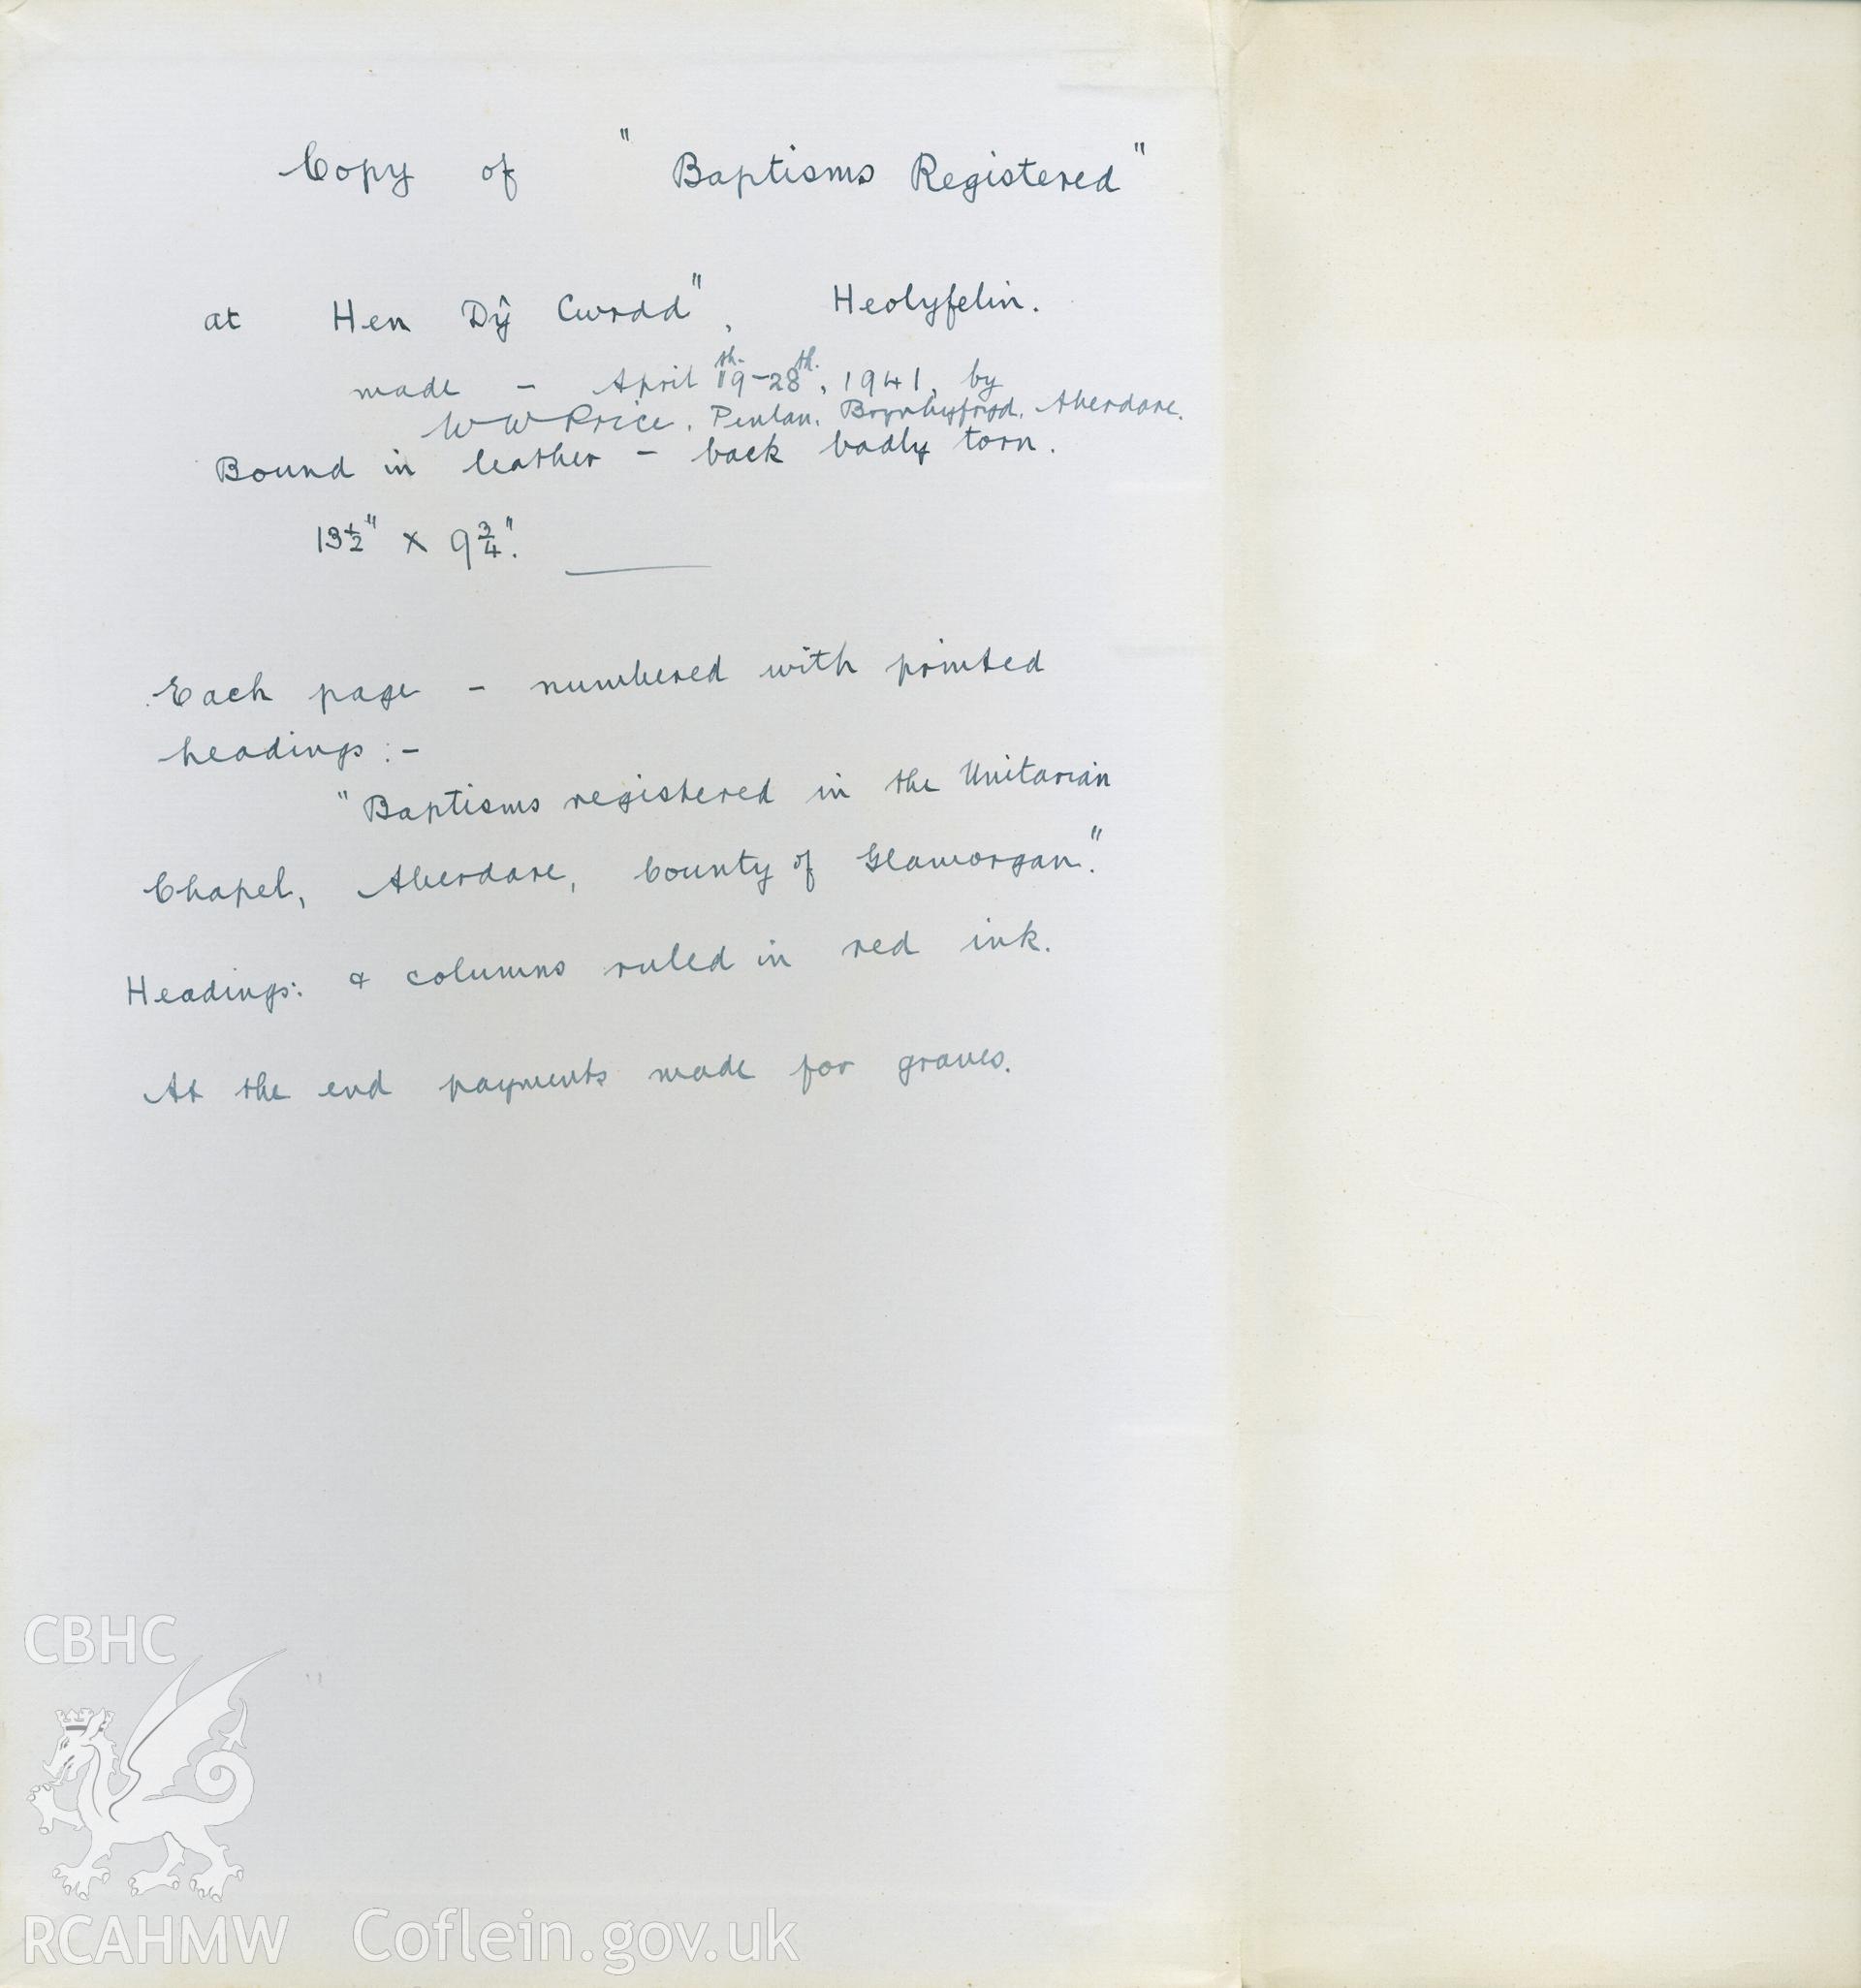 Description of the "Baptism Registered" book for Hen Dy Cwrdd, made between April 19th and 28th, 1941, by W. W. Price, Penlan, Brynhyfyd, Aberdare. Donated to the RCAHMW as part of the Digital Dissent Project.